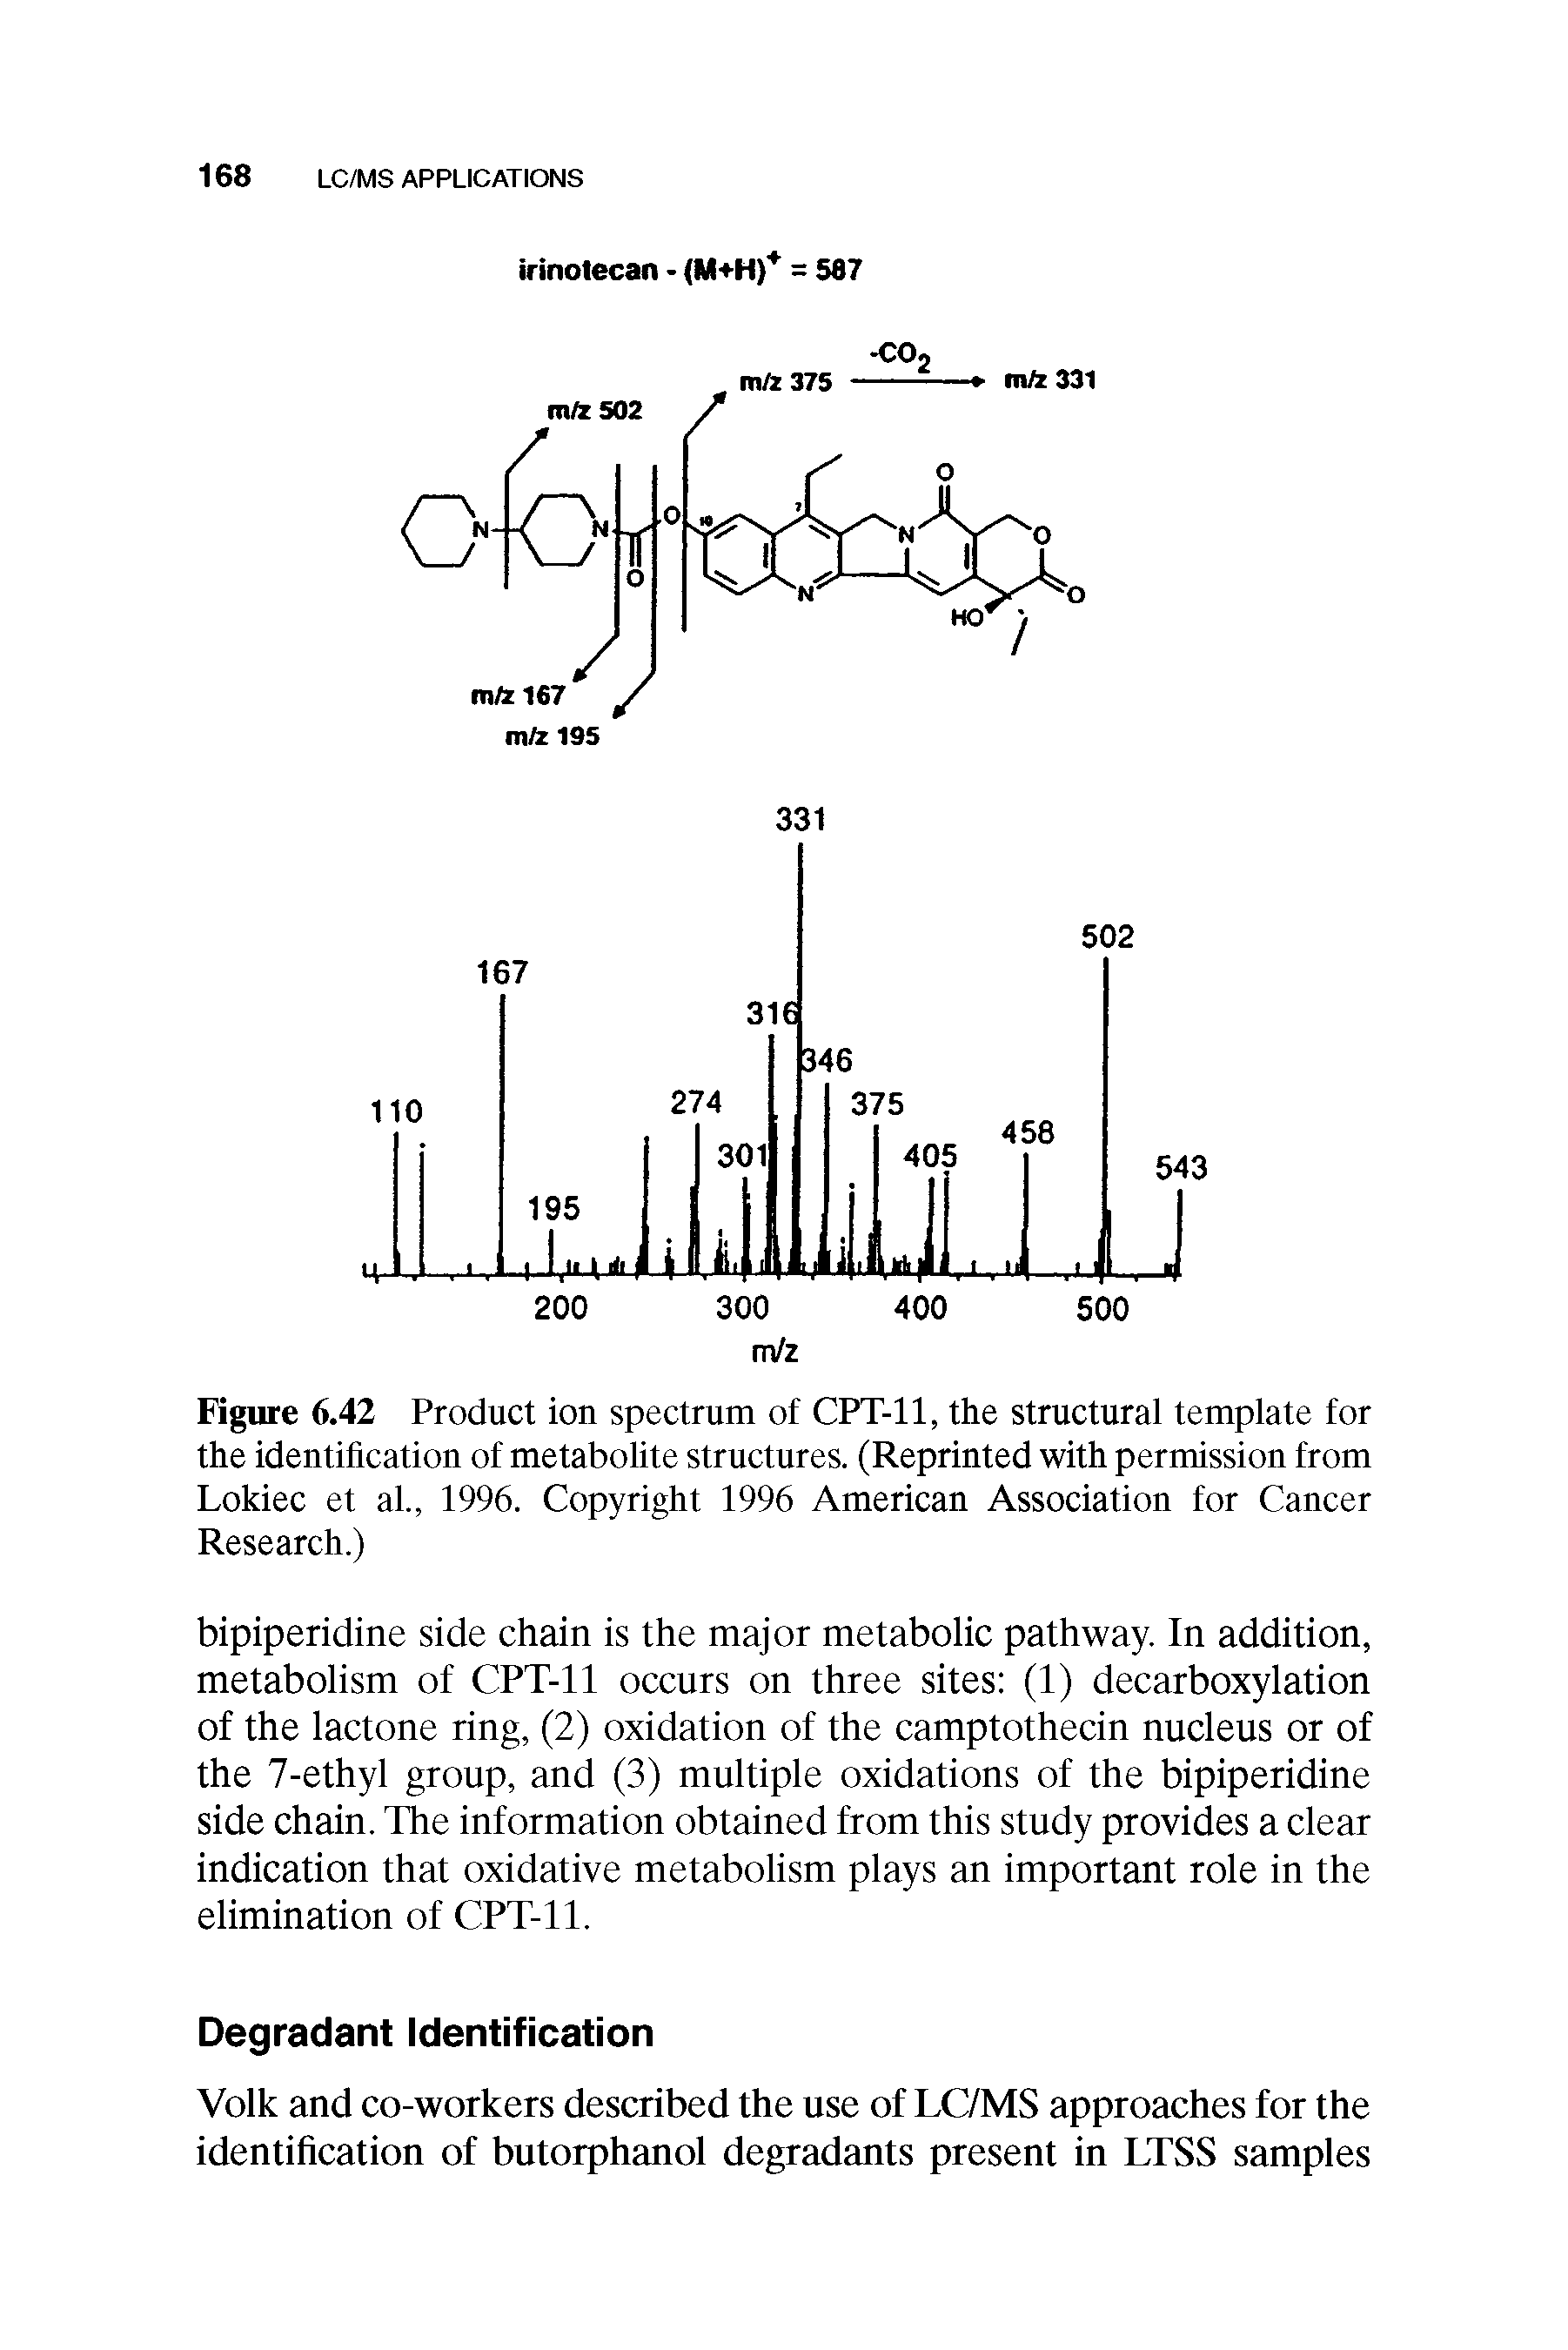 Figure 6.42 Product ion spectrum of CPT-11, the structural template for the identification of metabolite structures. (Reprinted with permission from Lokiec et al., 1996. Copyright 1996 American Association for Cancer Research.)...